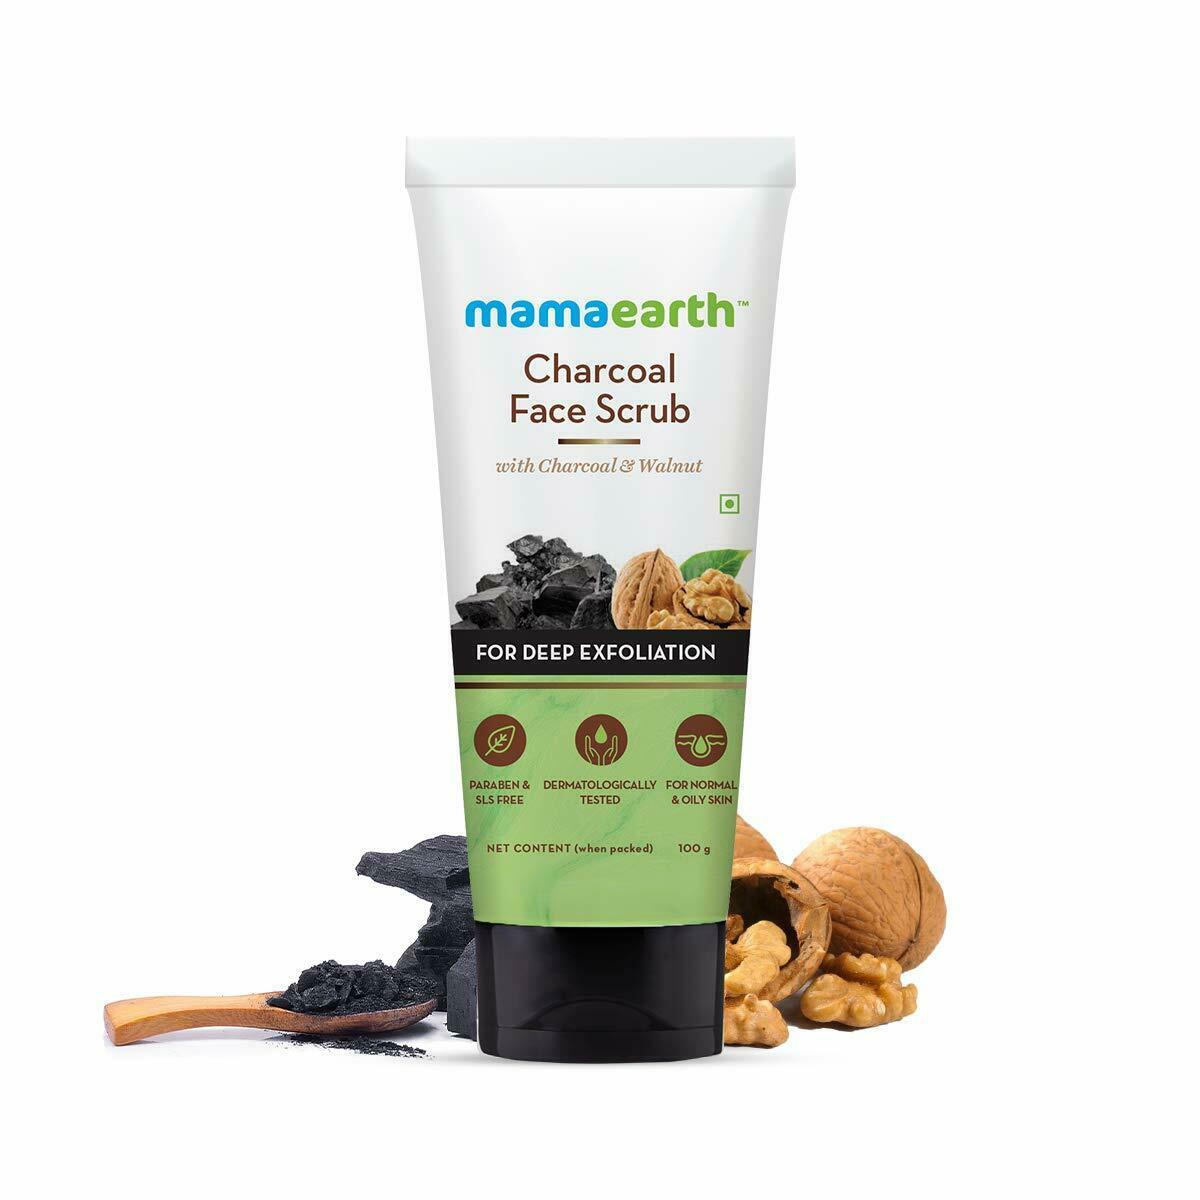 Mamaearth Charcoal Face Scrub, with Charcoal and Walnut, 100g (Pack of 1)